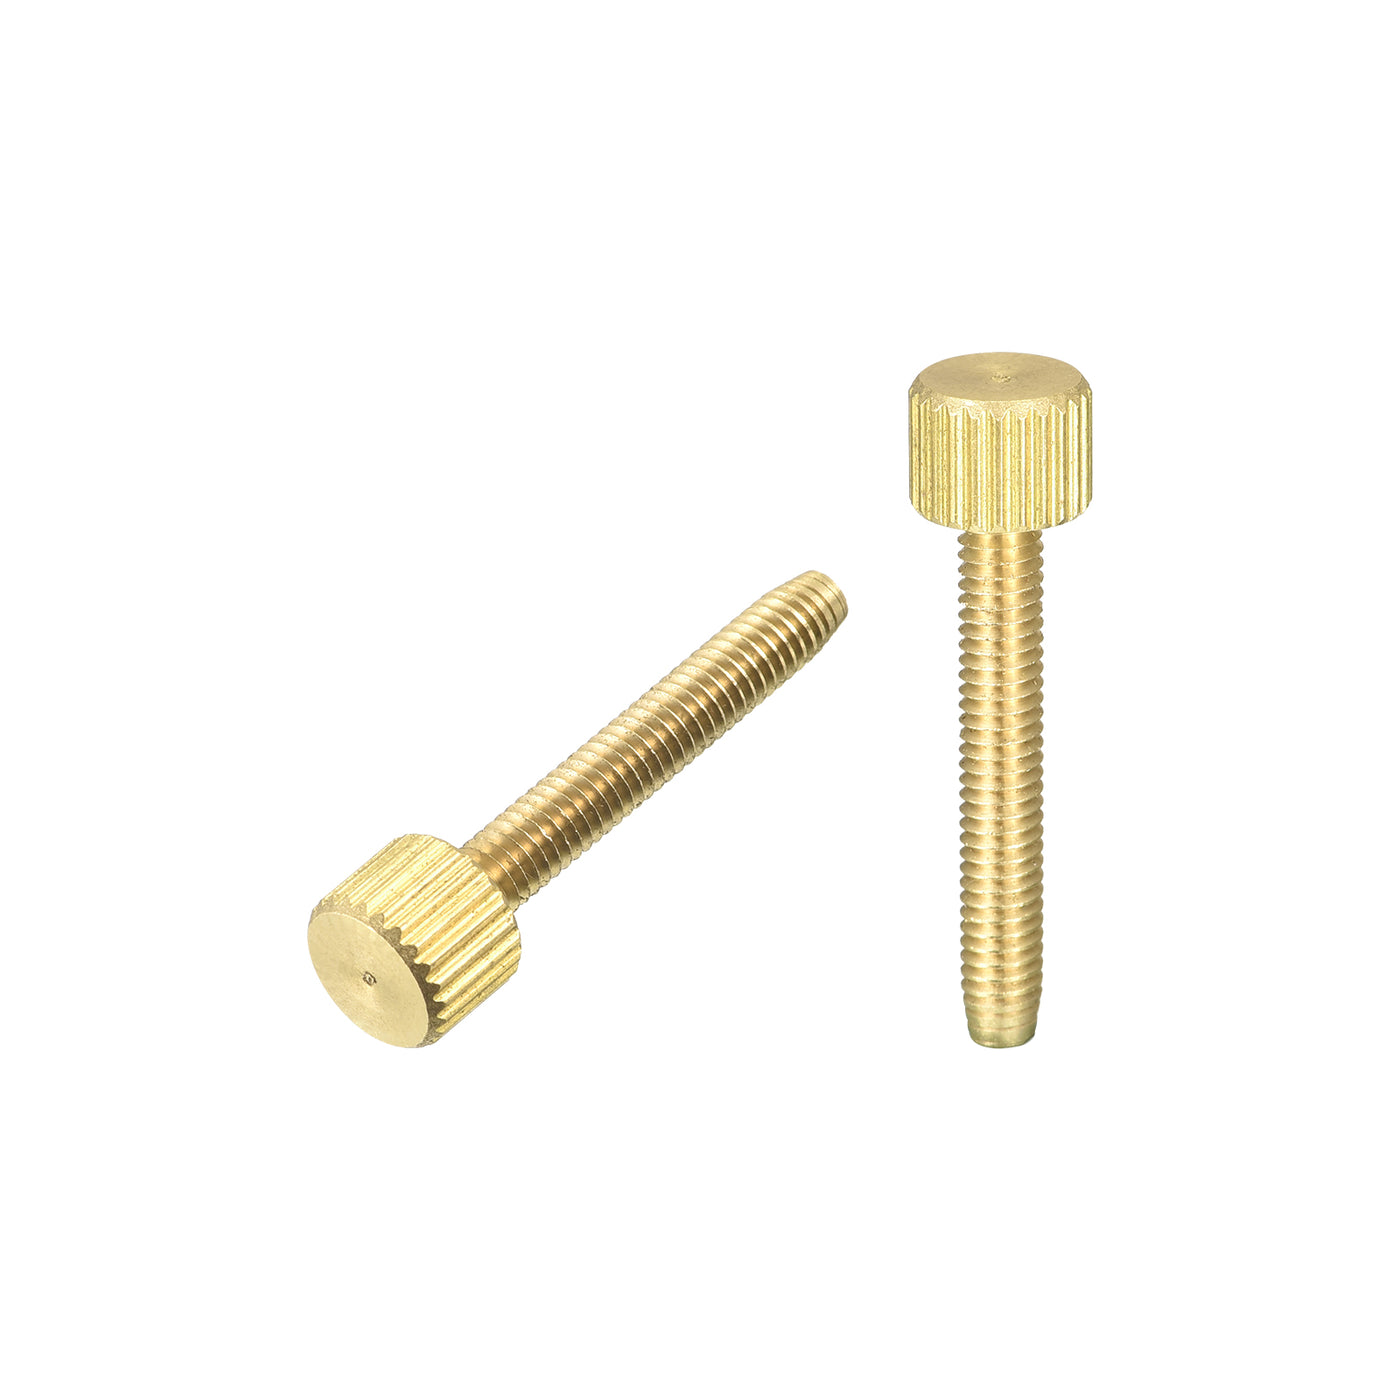 uxcell Uxcell Knurled Thumb Screws, M4x25mm Flat Brass Bolts 8mm Dia.Grip Knobs Fasteners for PC, Electronic, Mechanical 2Pcs